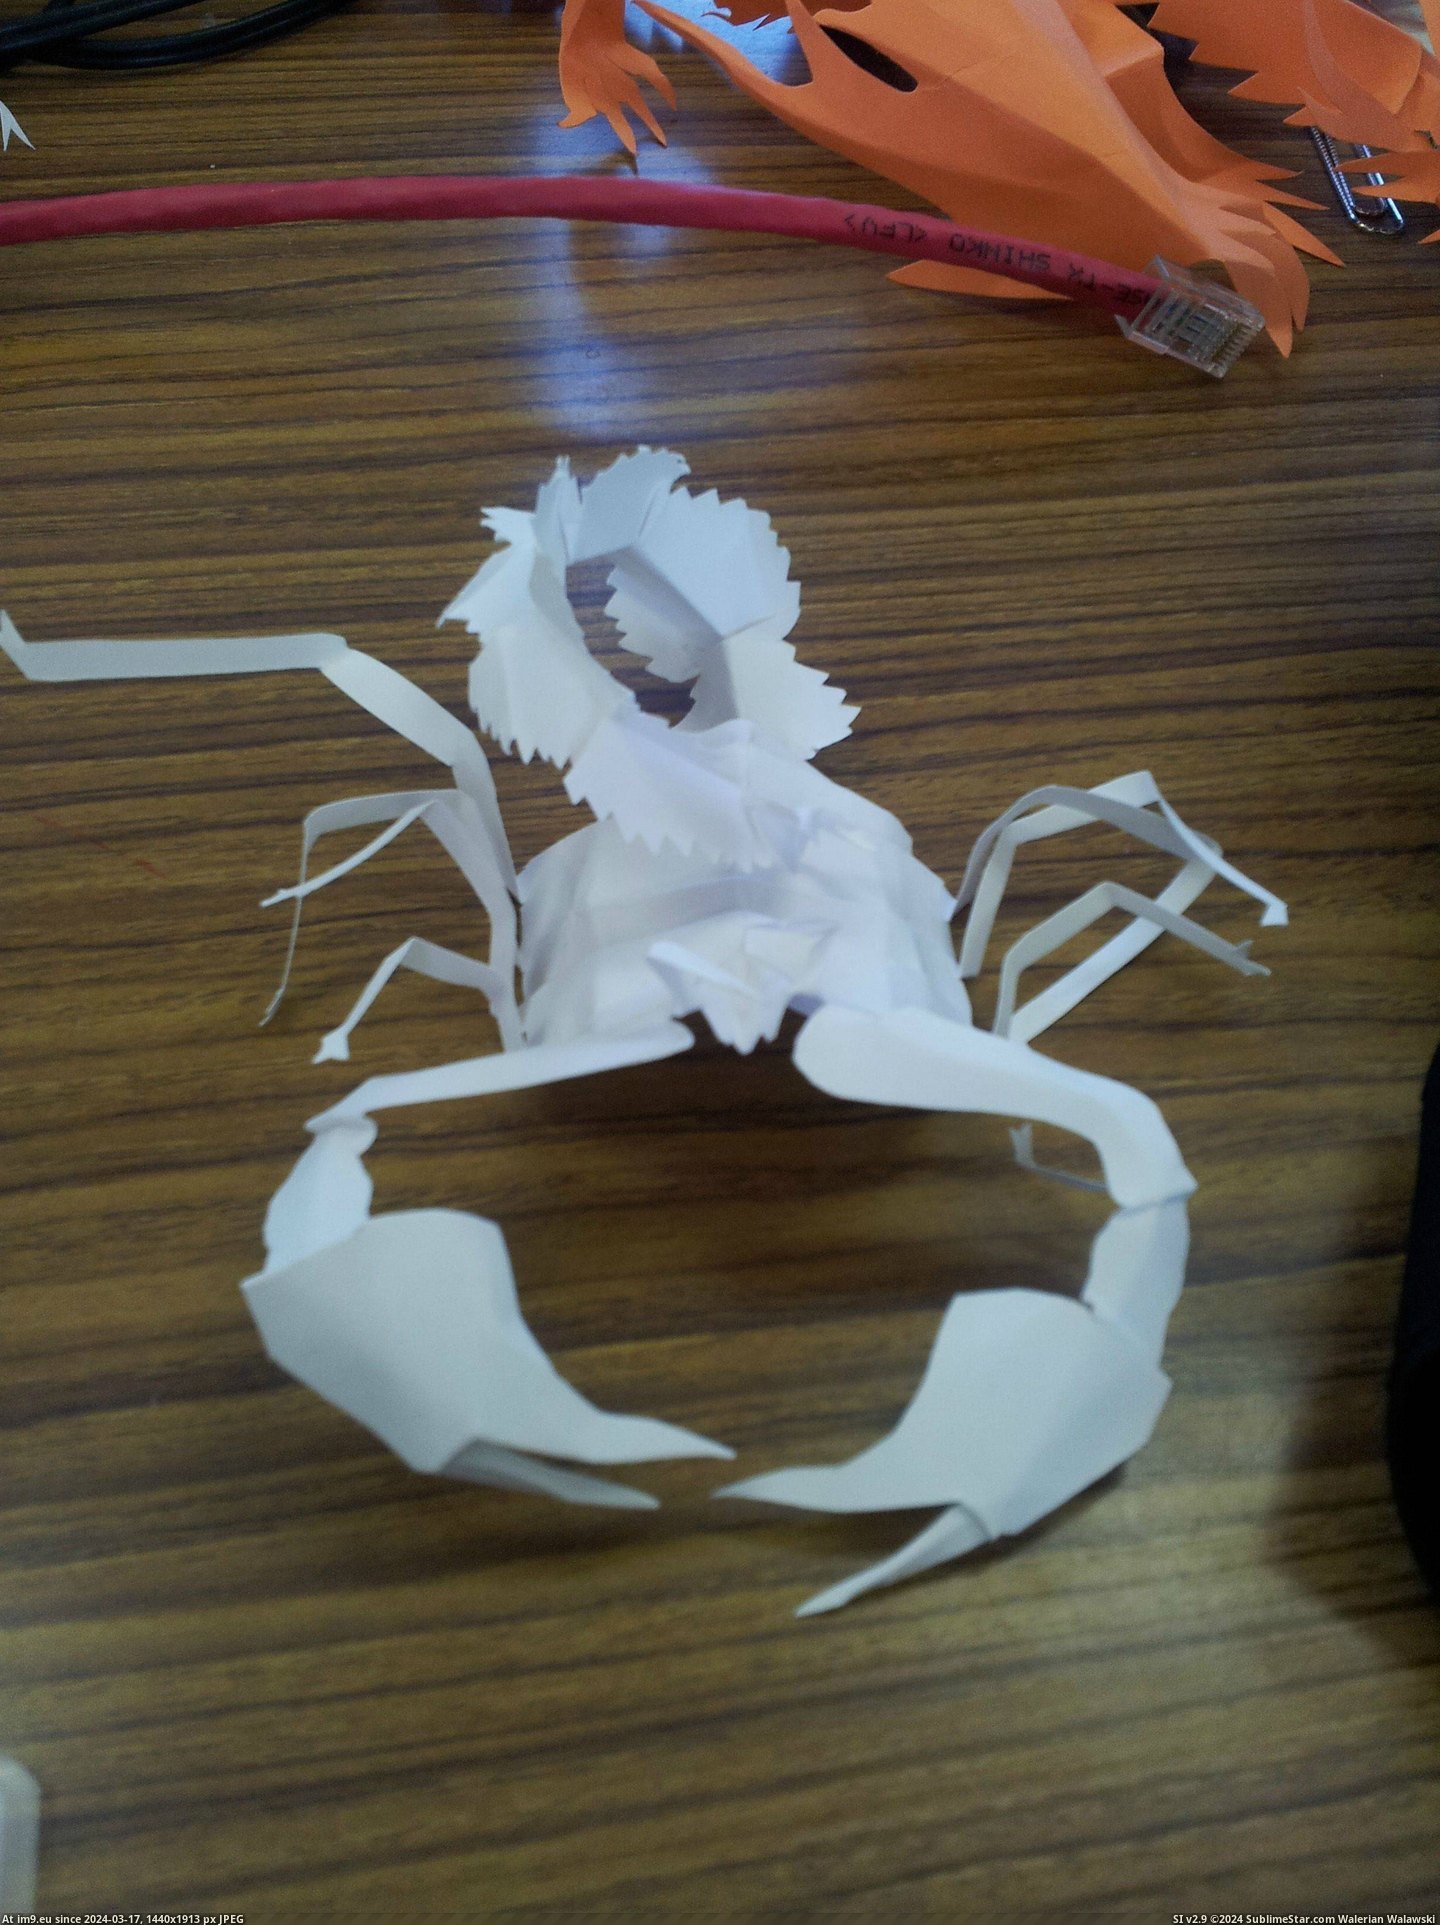 #One #Paper #Students #Creatures #Freehand #Bored #Completely [Pics] One of my students makes these creatures out of paper completely freehand whenever he is bored 7 Pic. (Image of album My r/PICS favs))